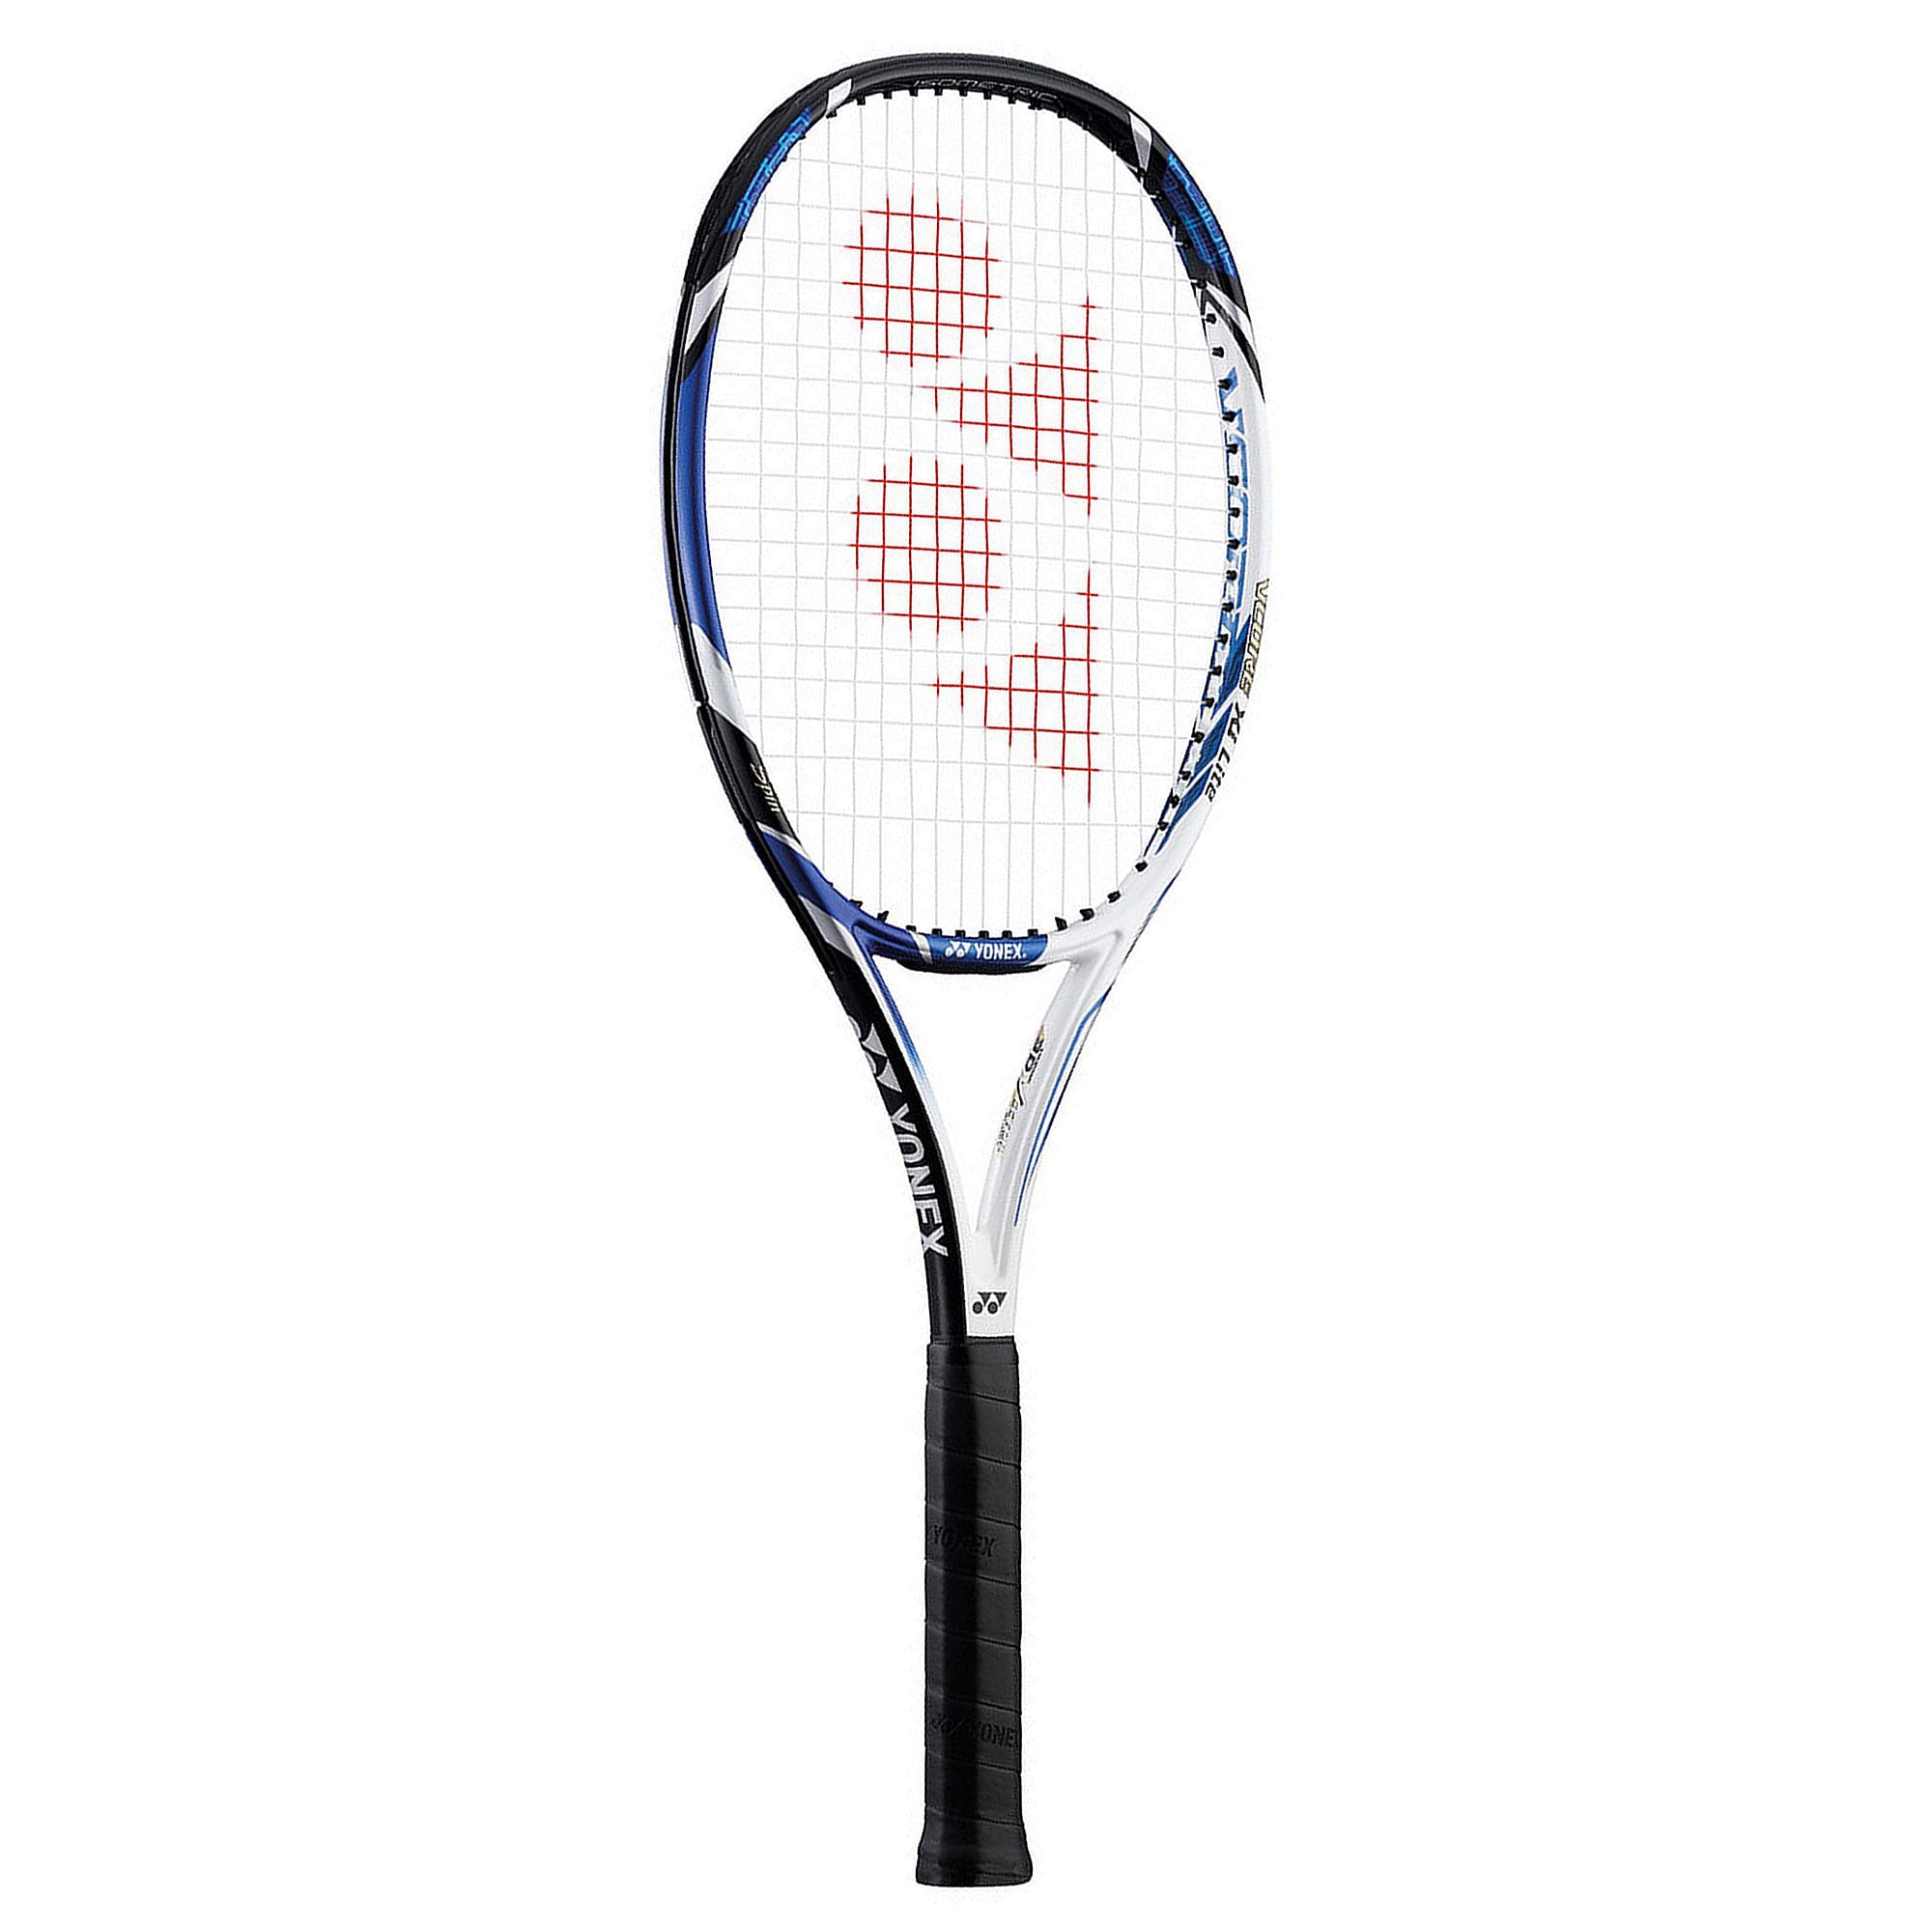 Top 10 Tennis rackets to buy under Rs 5000